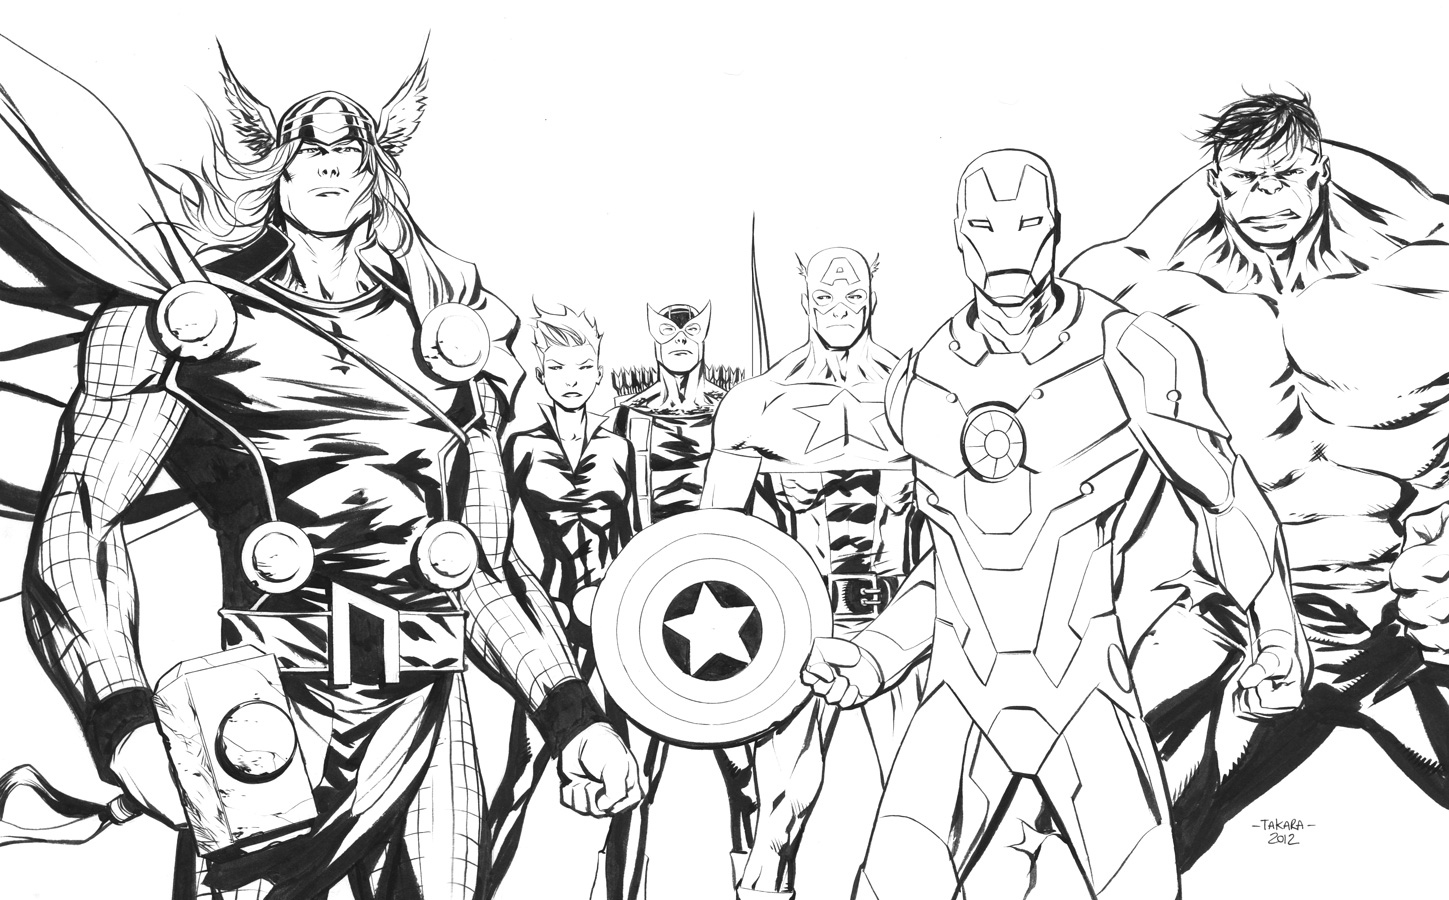 marvel avengers coloring pages